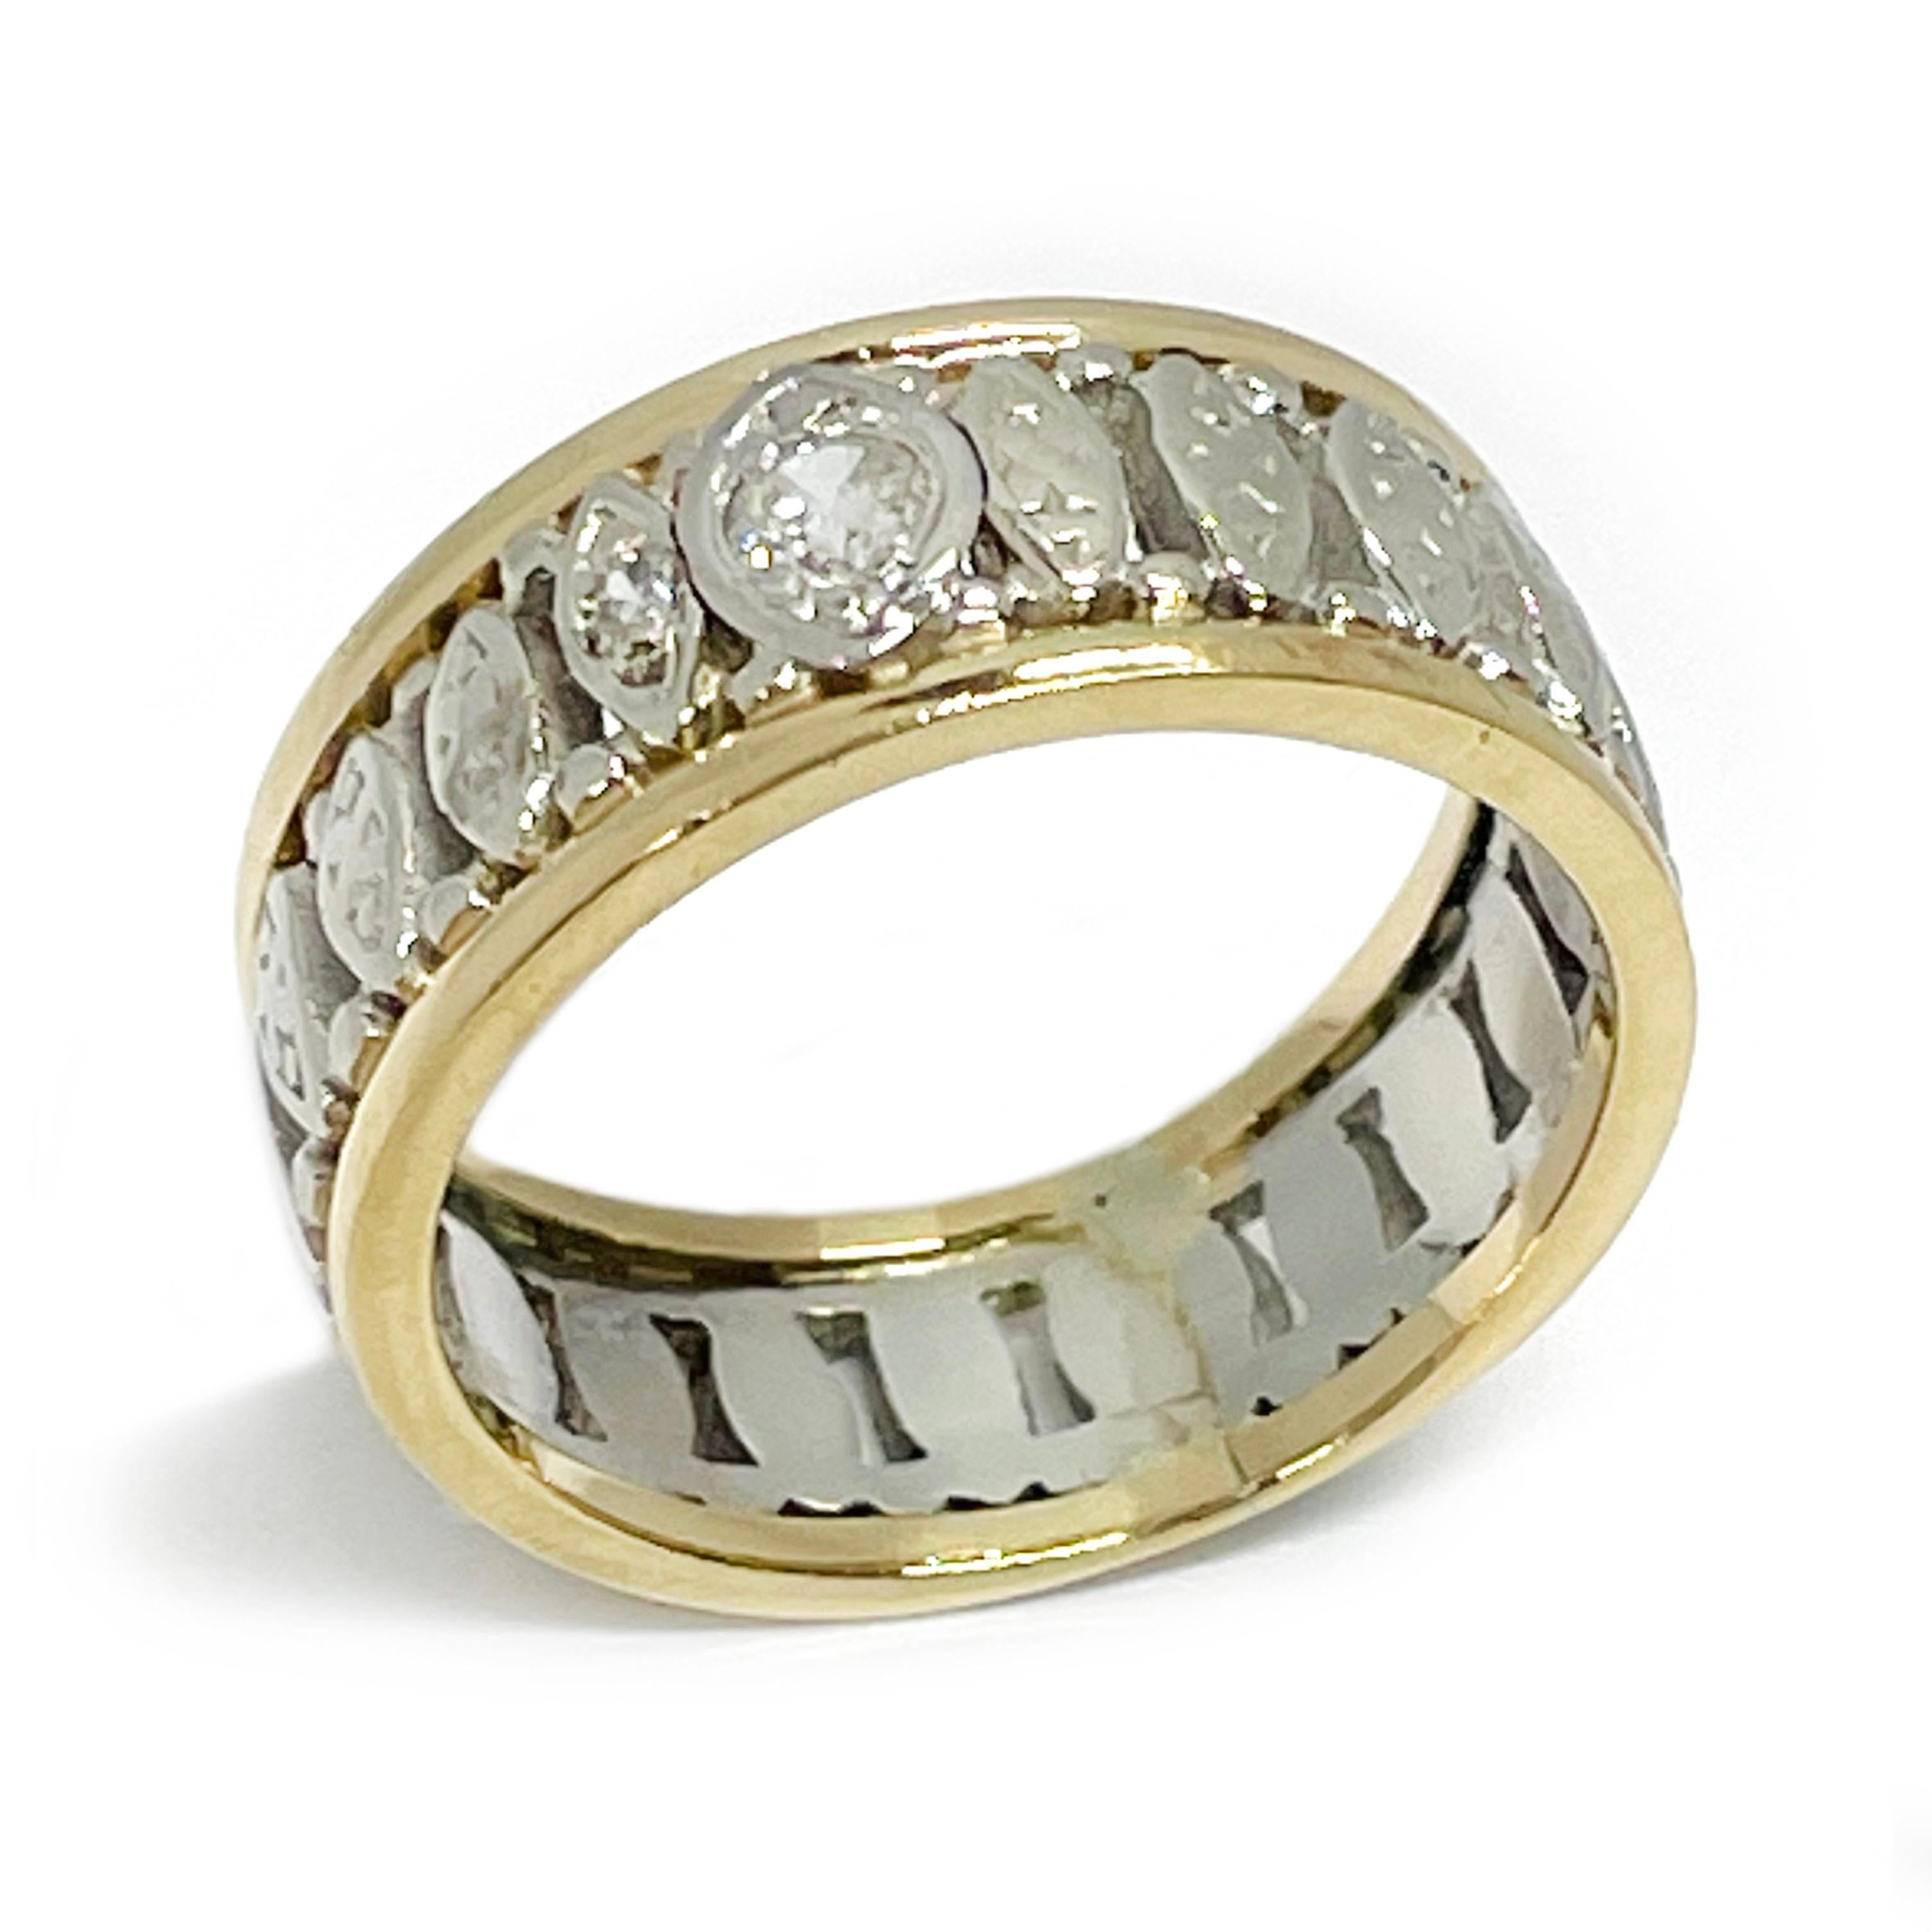 14 Karat Yellow and White Gold Fancy Diamond Wedding Band. The ring features a yellow gold band at the center of the ring with white gold marquise-shaped bars between and white gold beads. Two of the marquise-shapes have a round diamond bead-set on